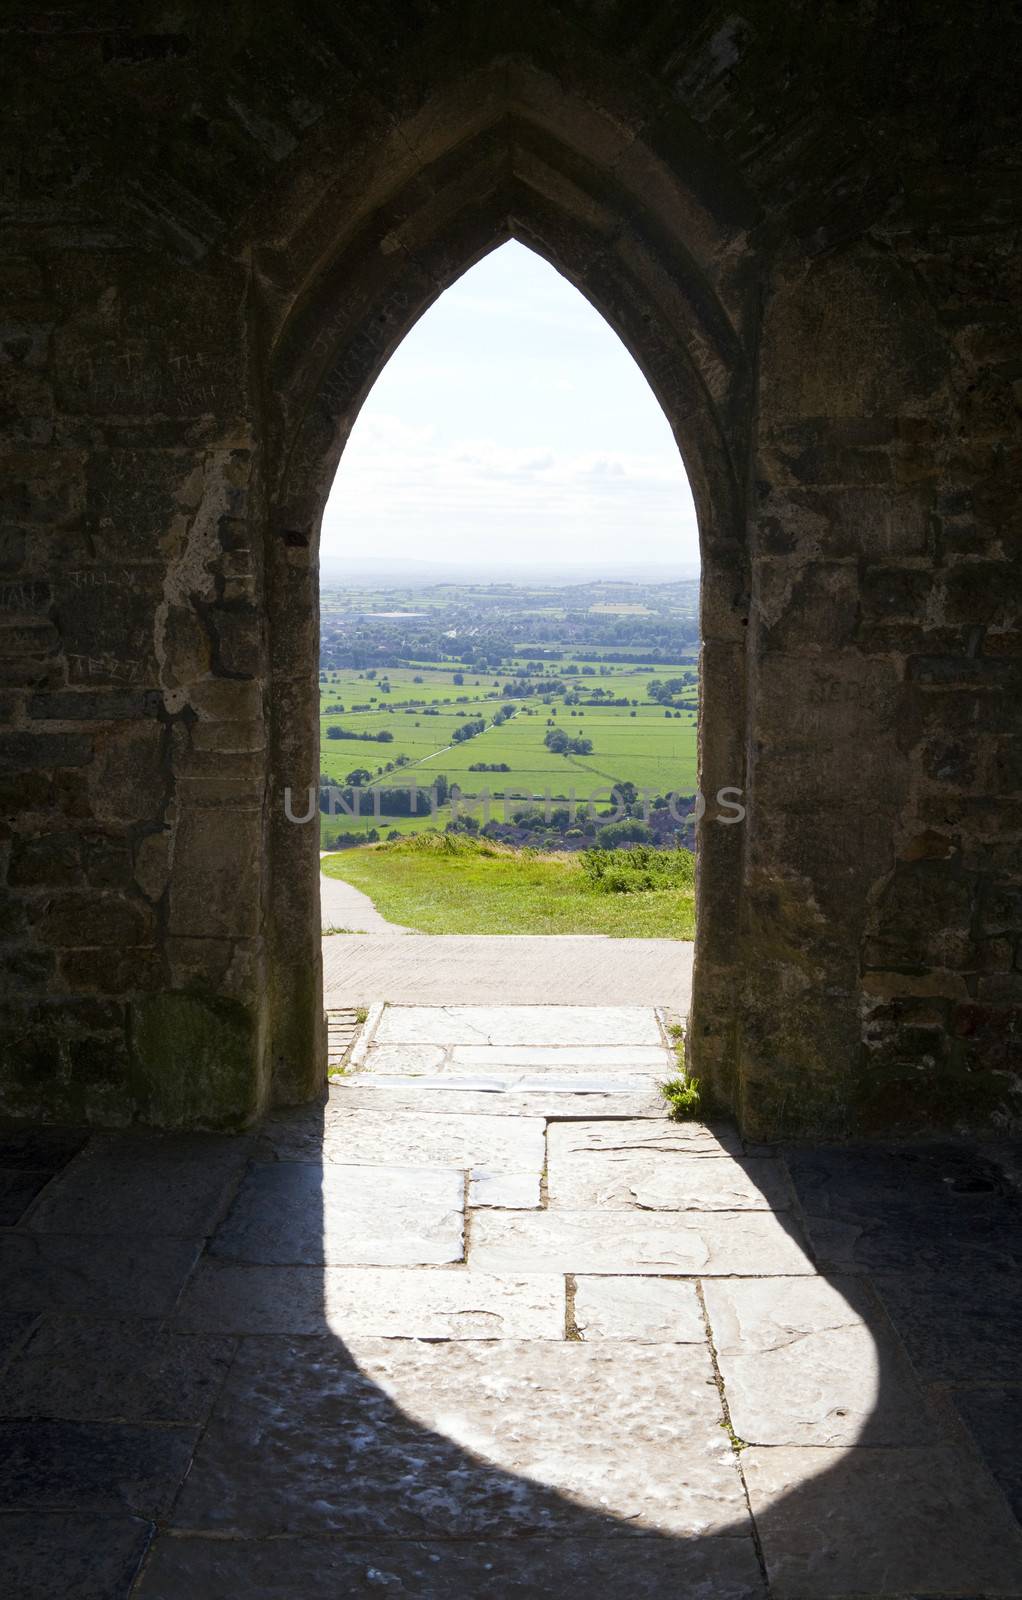 View through the doorway of St. Michaels Tower on Glastonbury Tor in Somerset, England.